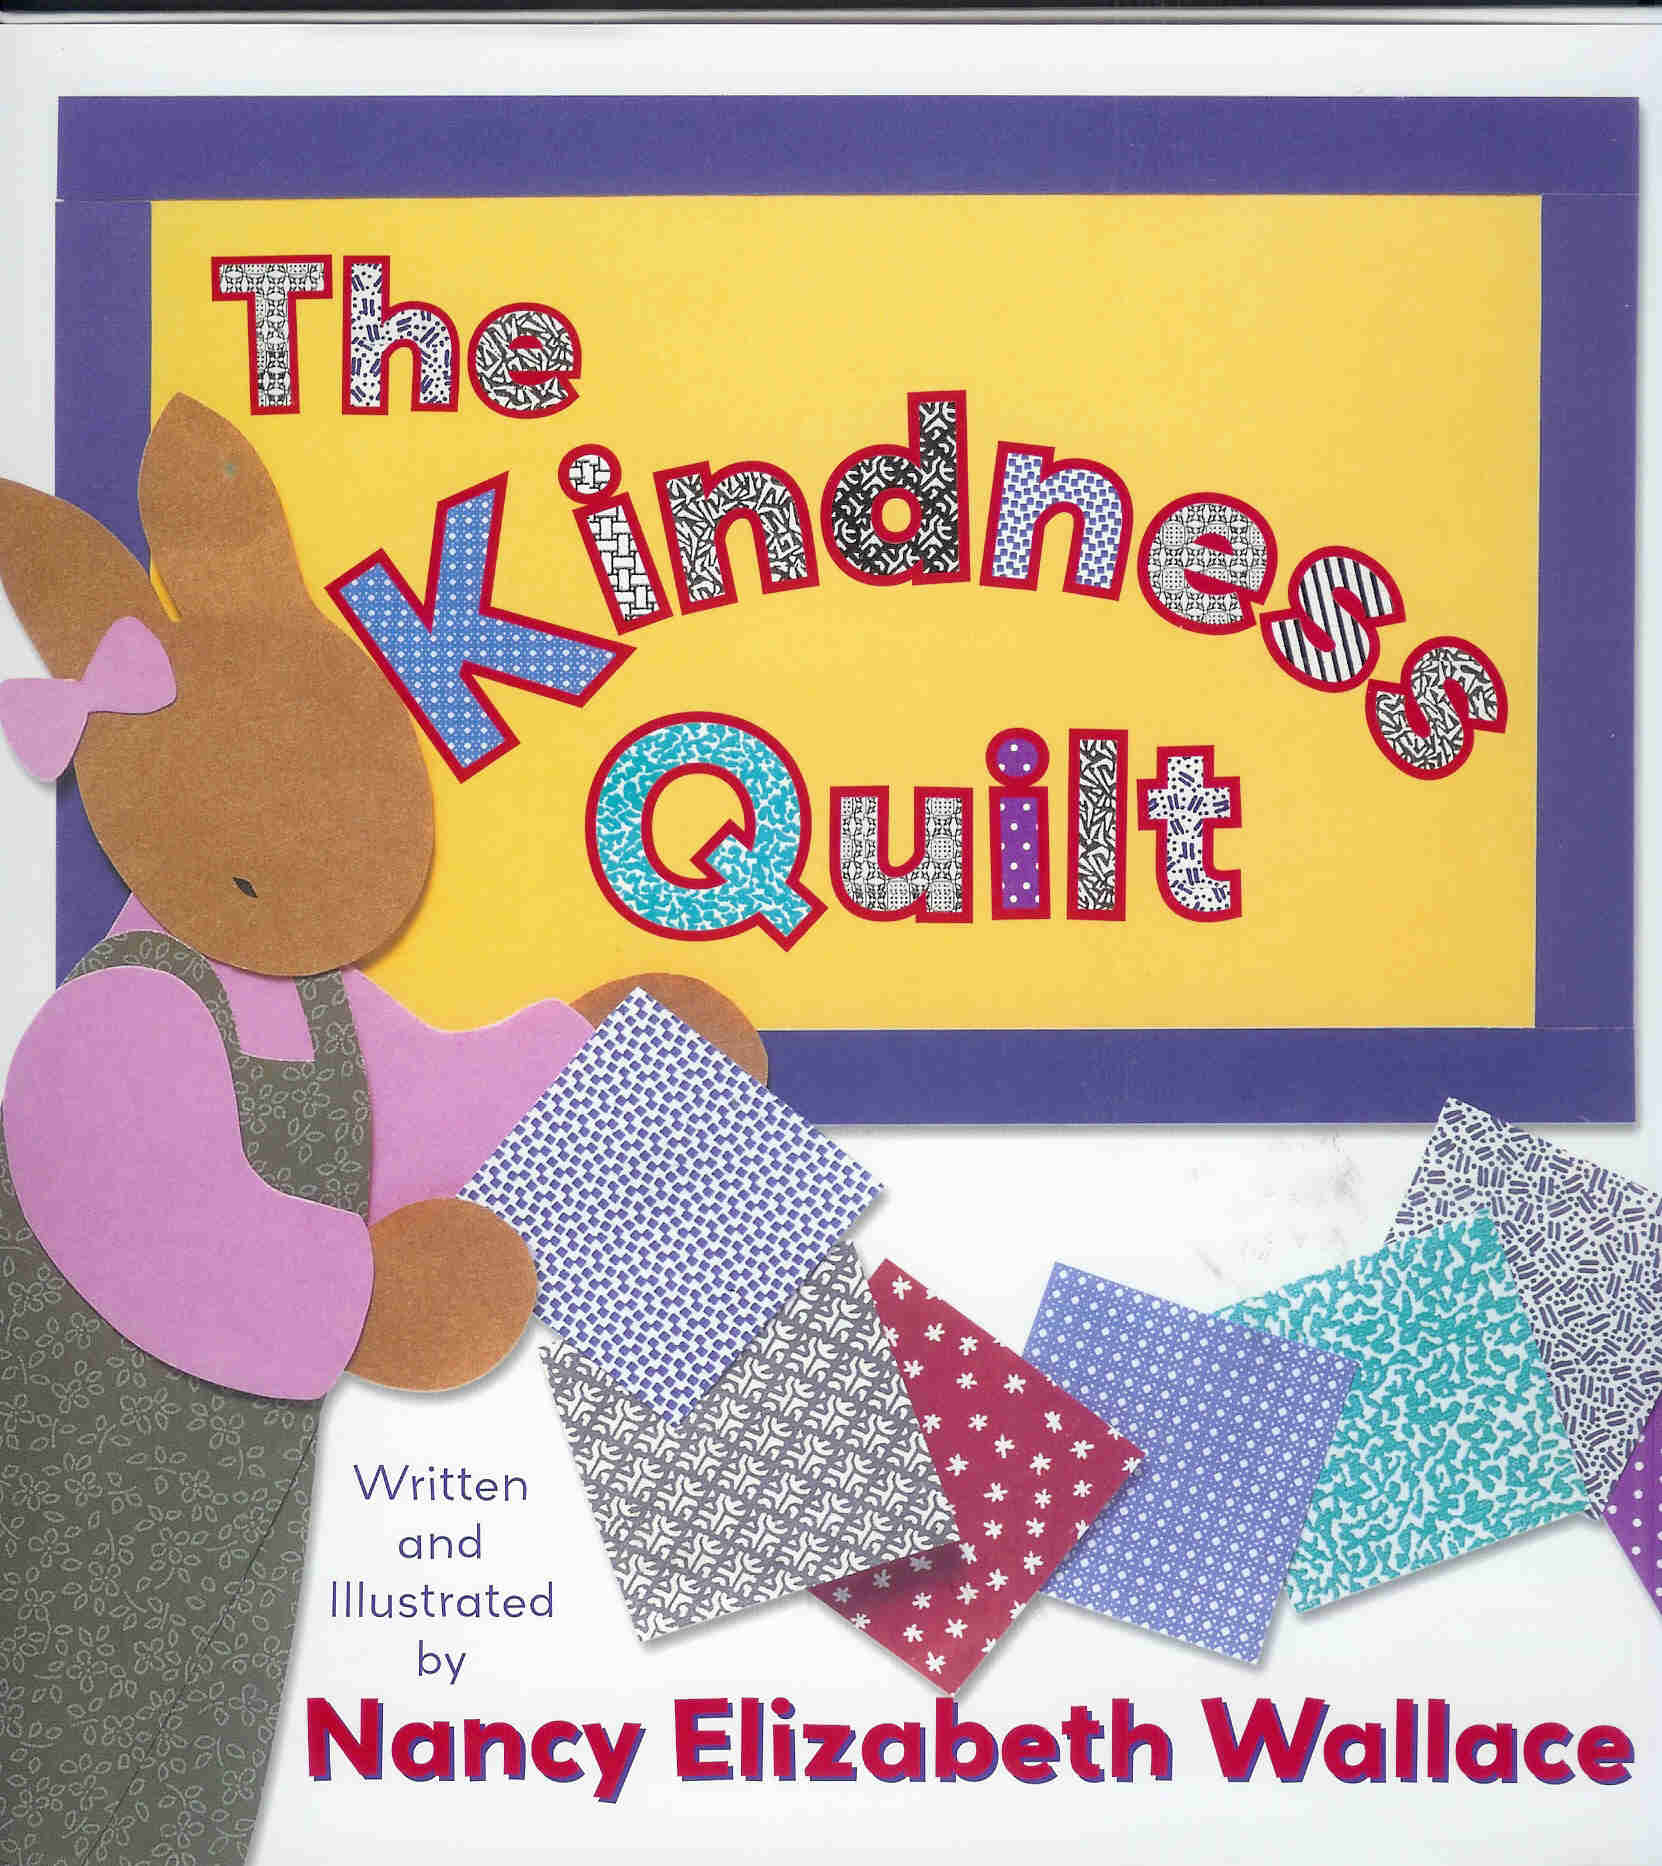 The Kindness quilt